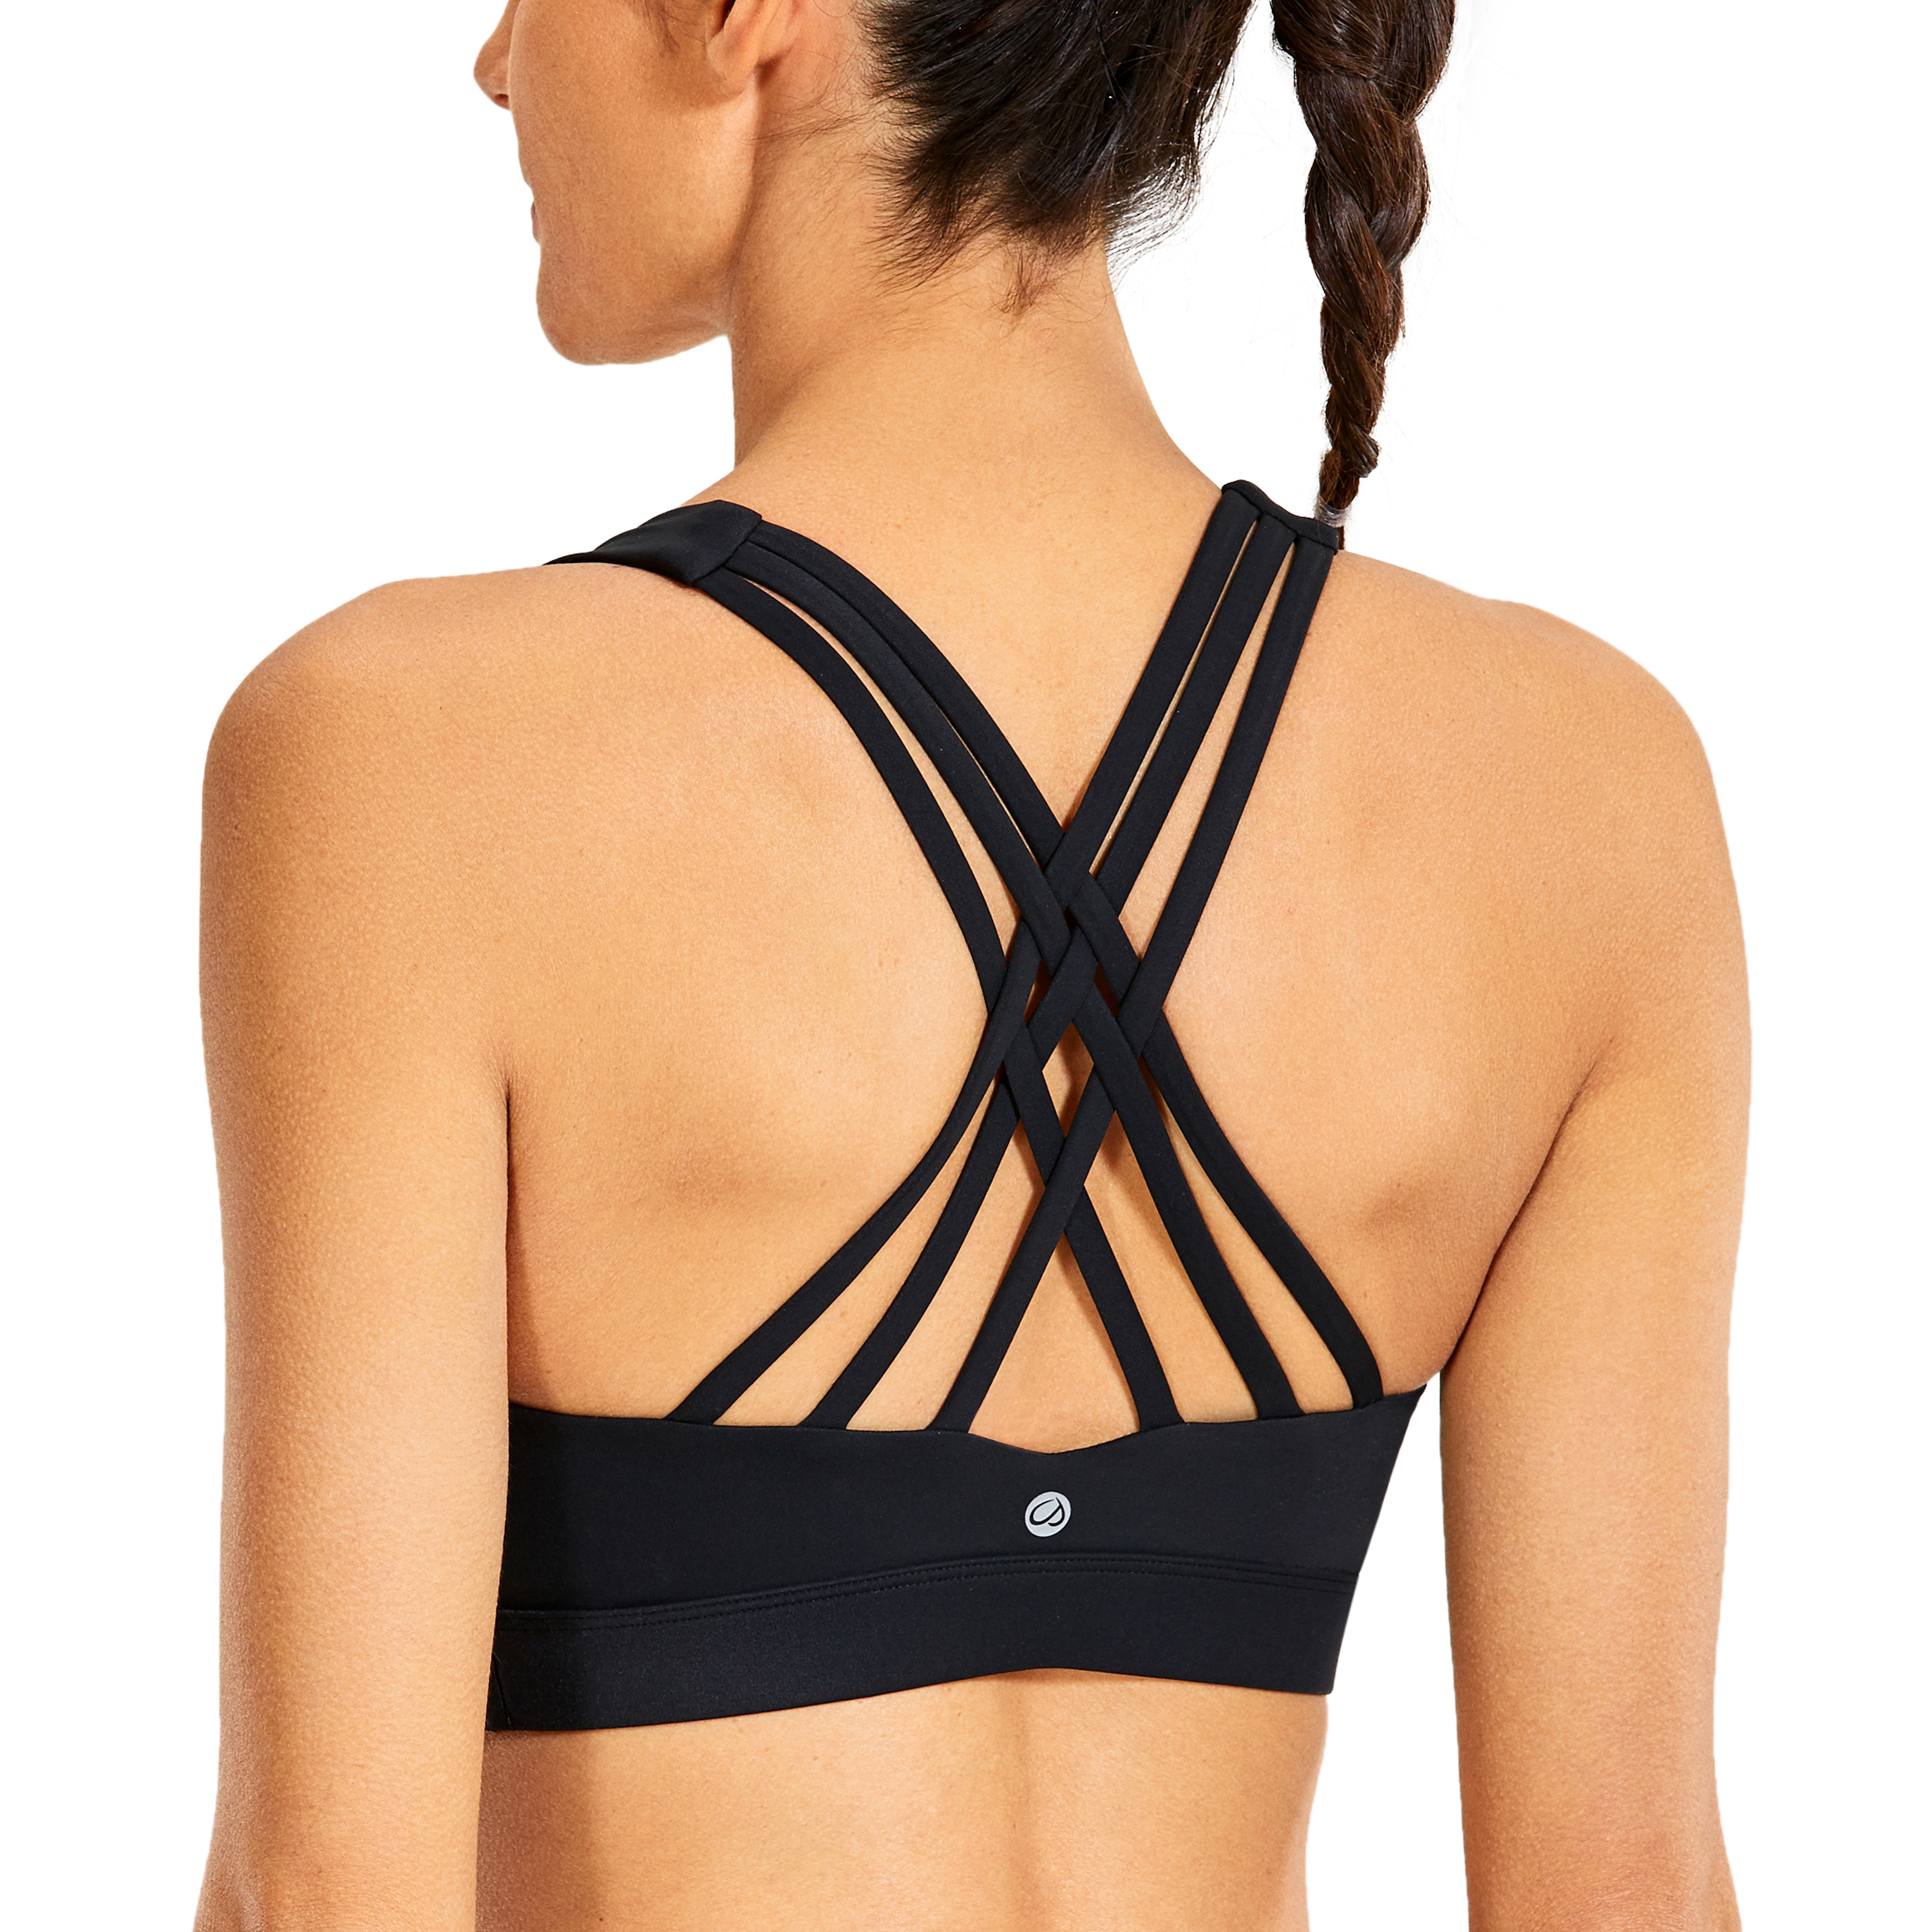 Strappy Sports Bras for Women Yoga Longline Workout Padded Bras Medium Support Running Tops 